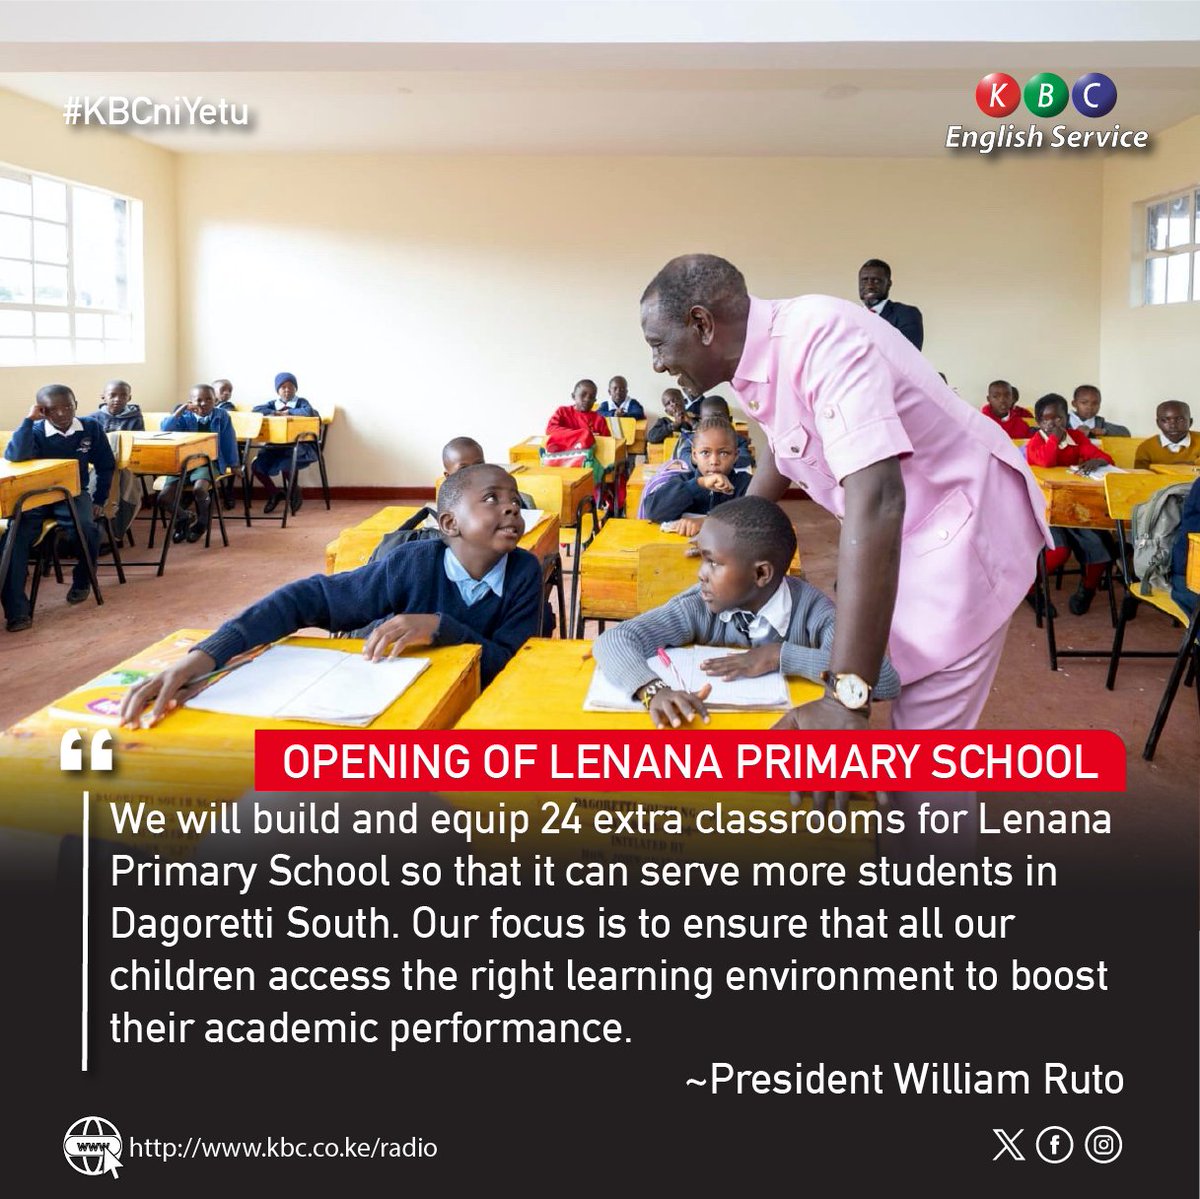 OPENING OF LENANA PRIMARY SCHOOL 'We will build and equip 24 extra classrooms for Lenana Primary School so that it can serve more students in Dagoretti South..' ~President William Ruto ^PMN #KBCEnglishService